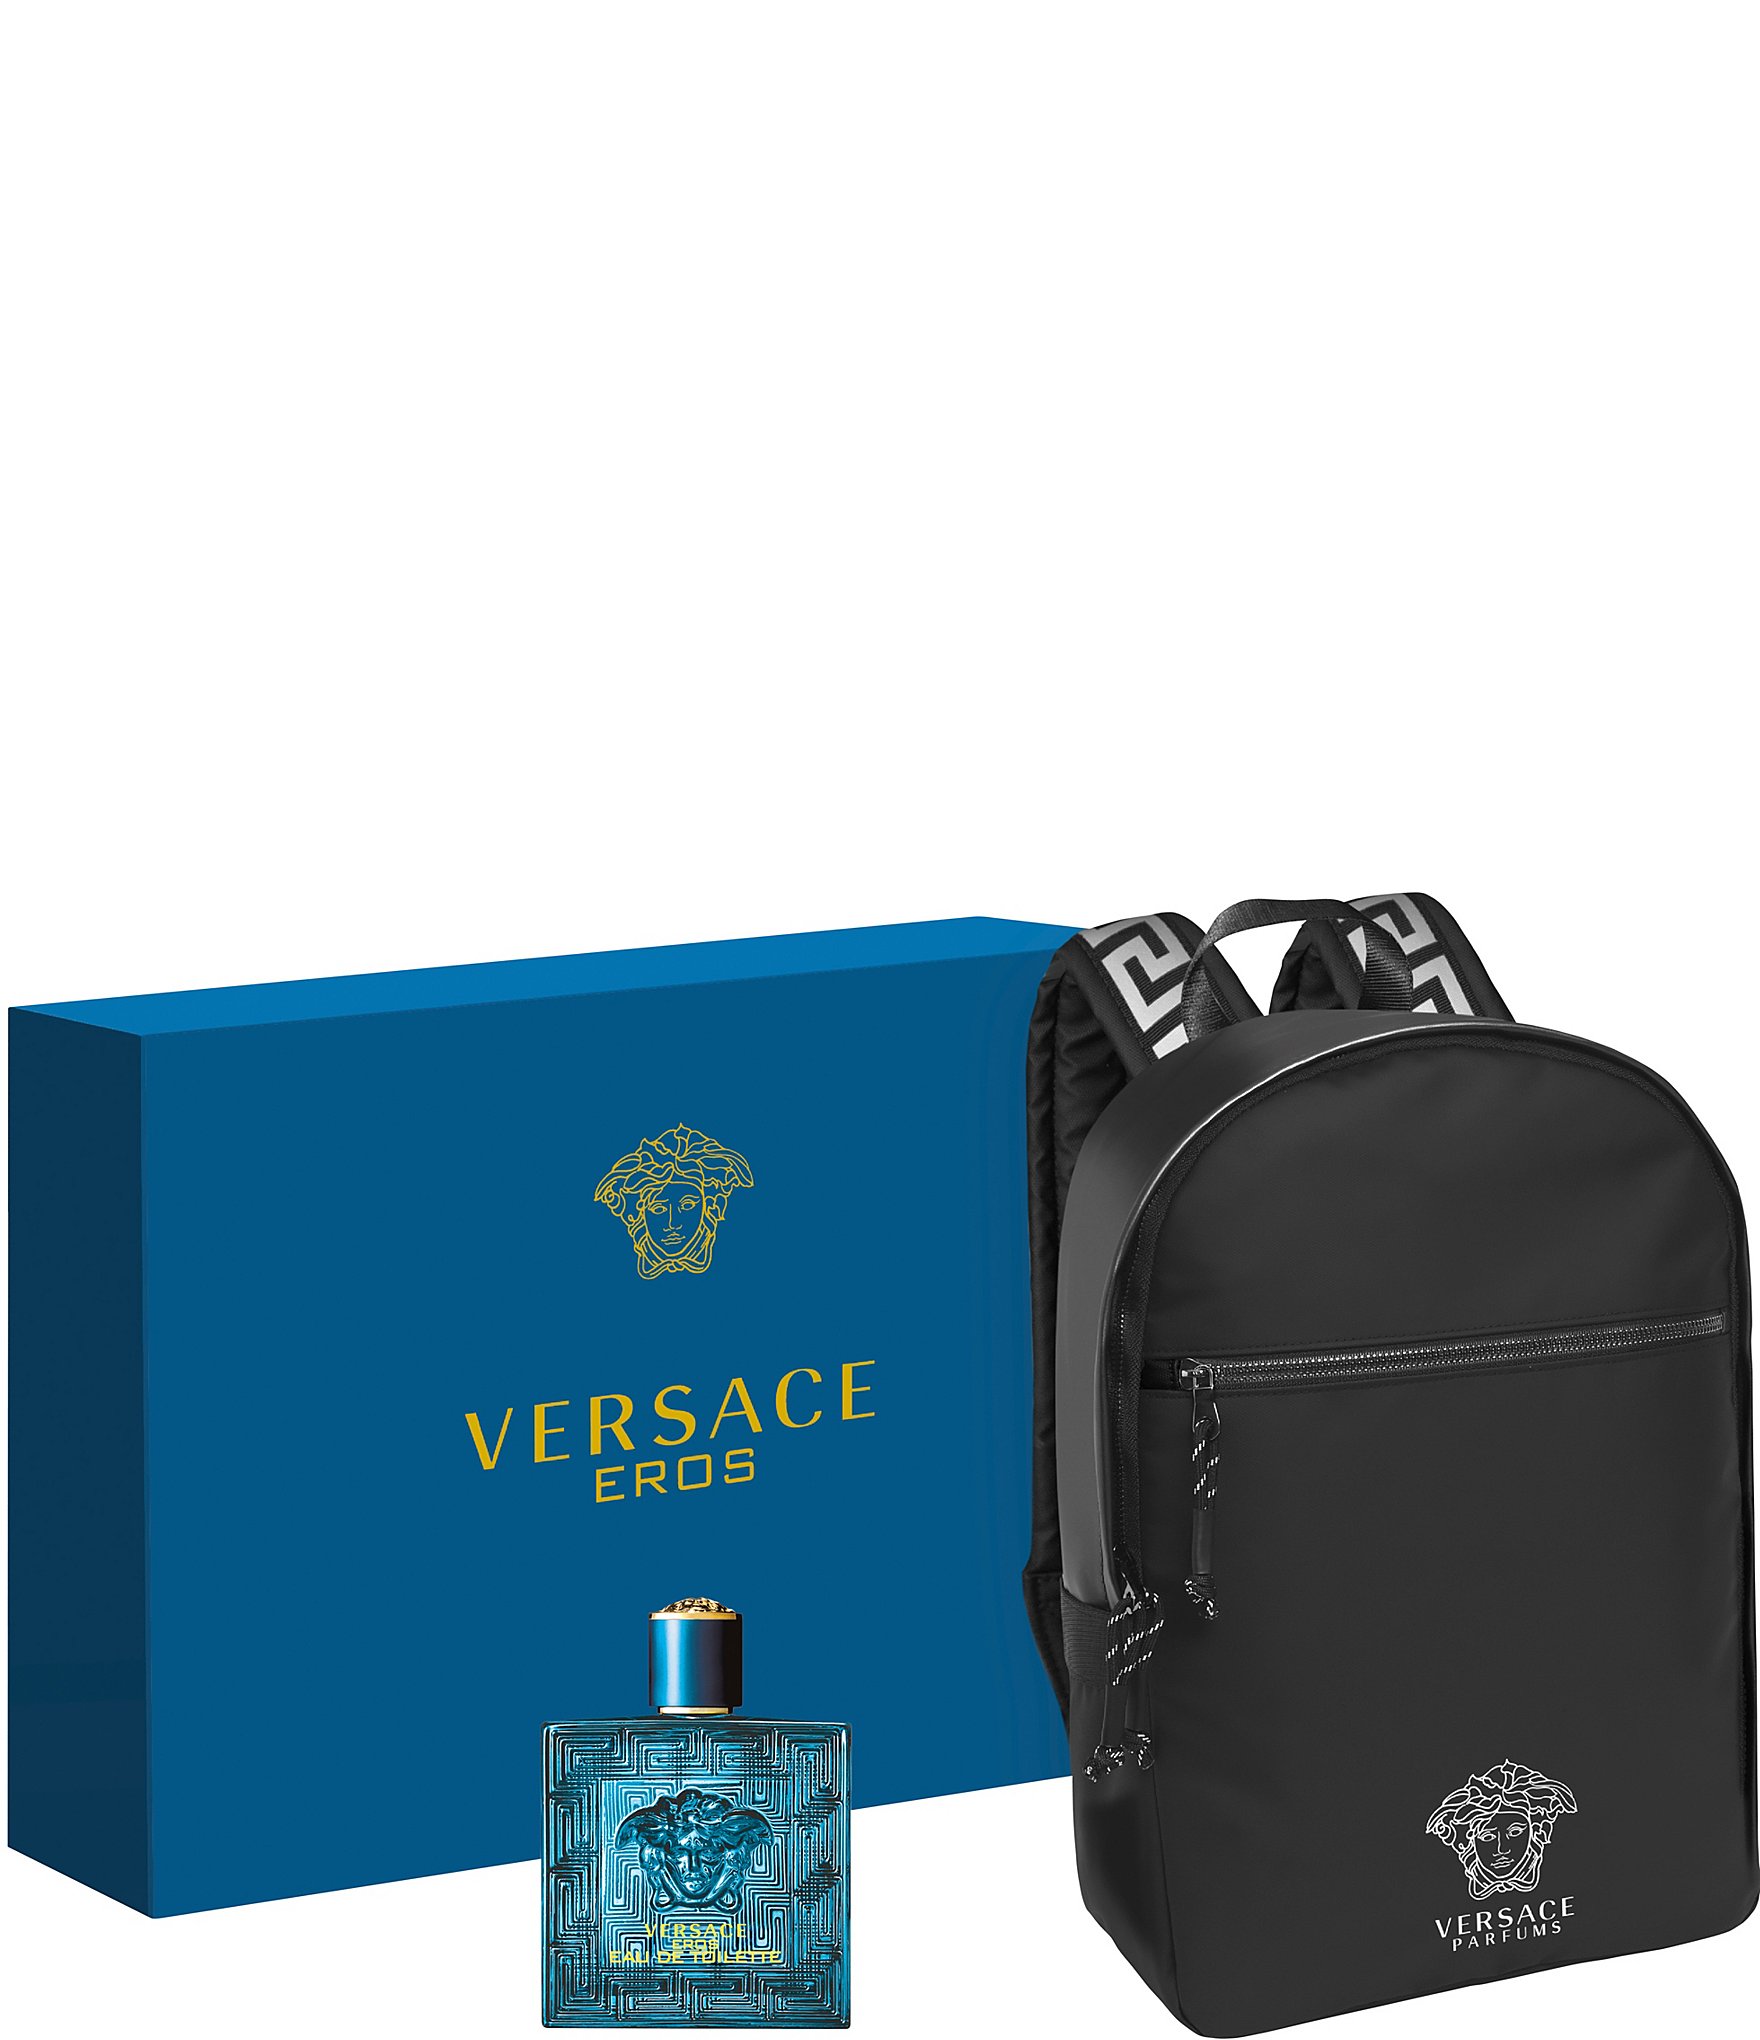 Versace Eros Perfume with Backpack: A Perfect Match!